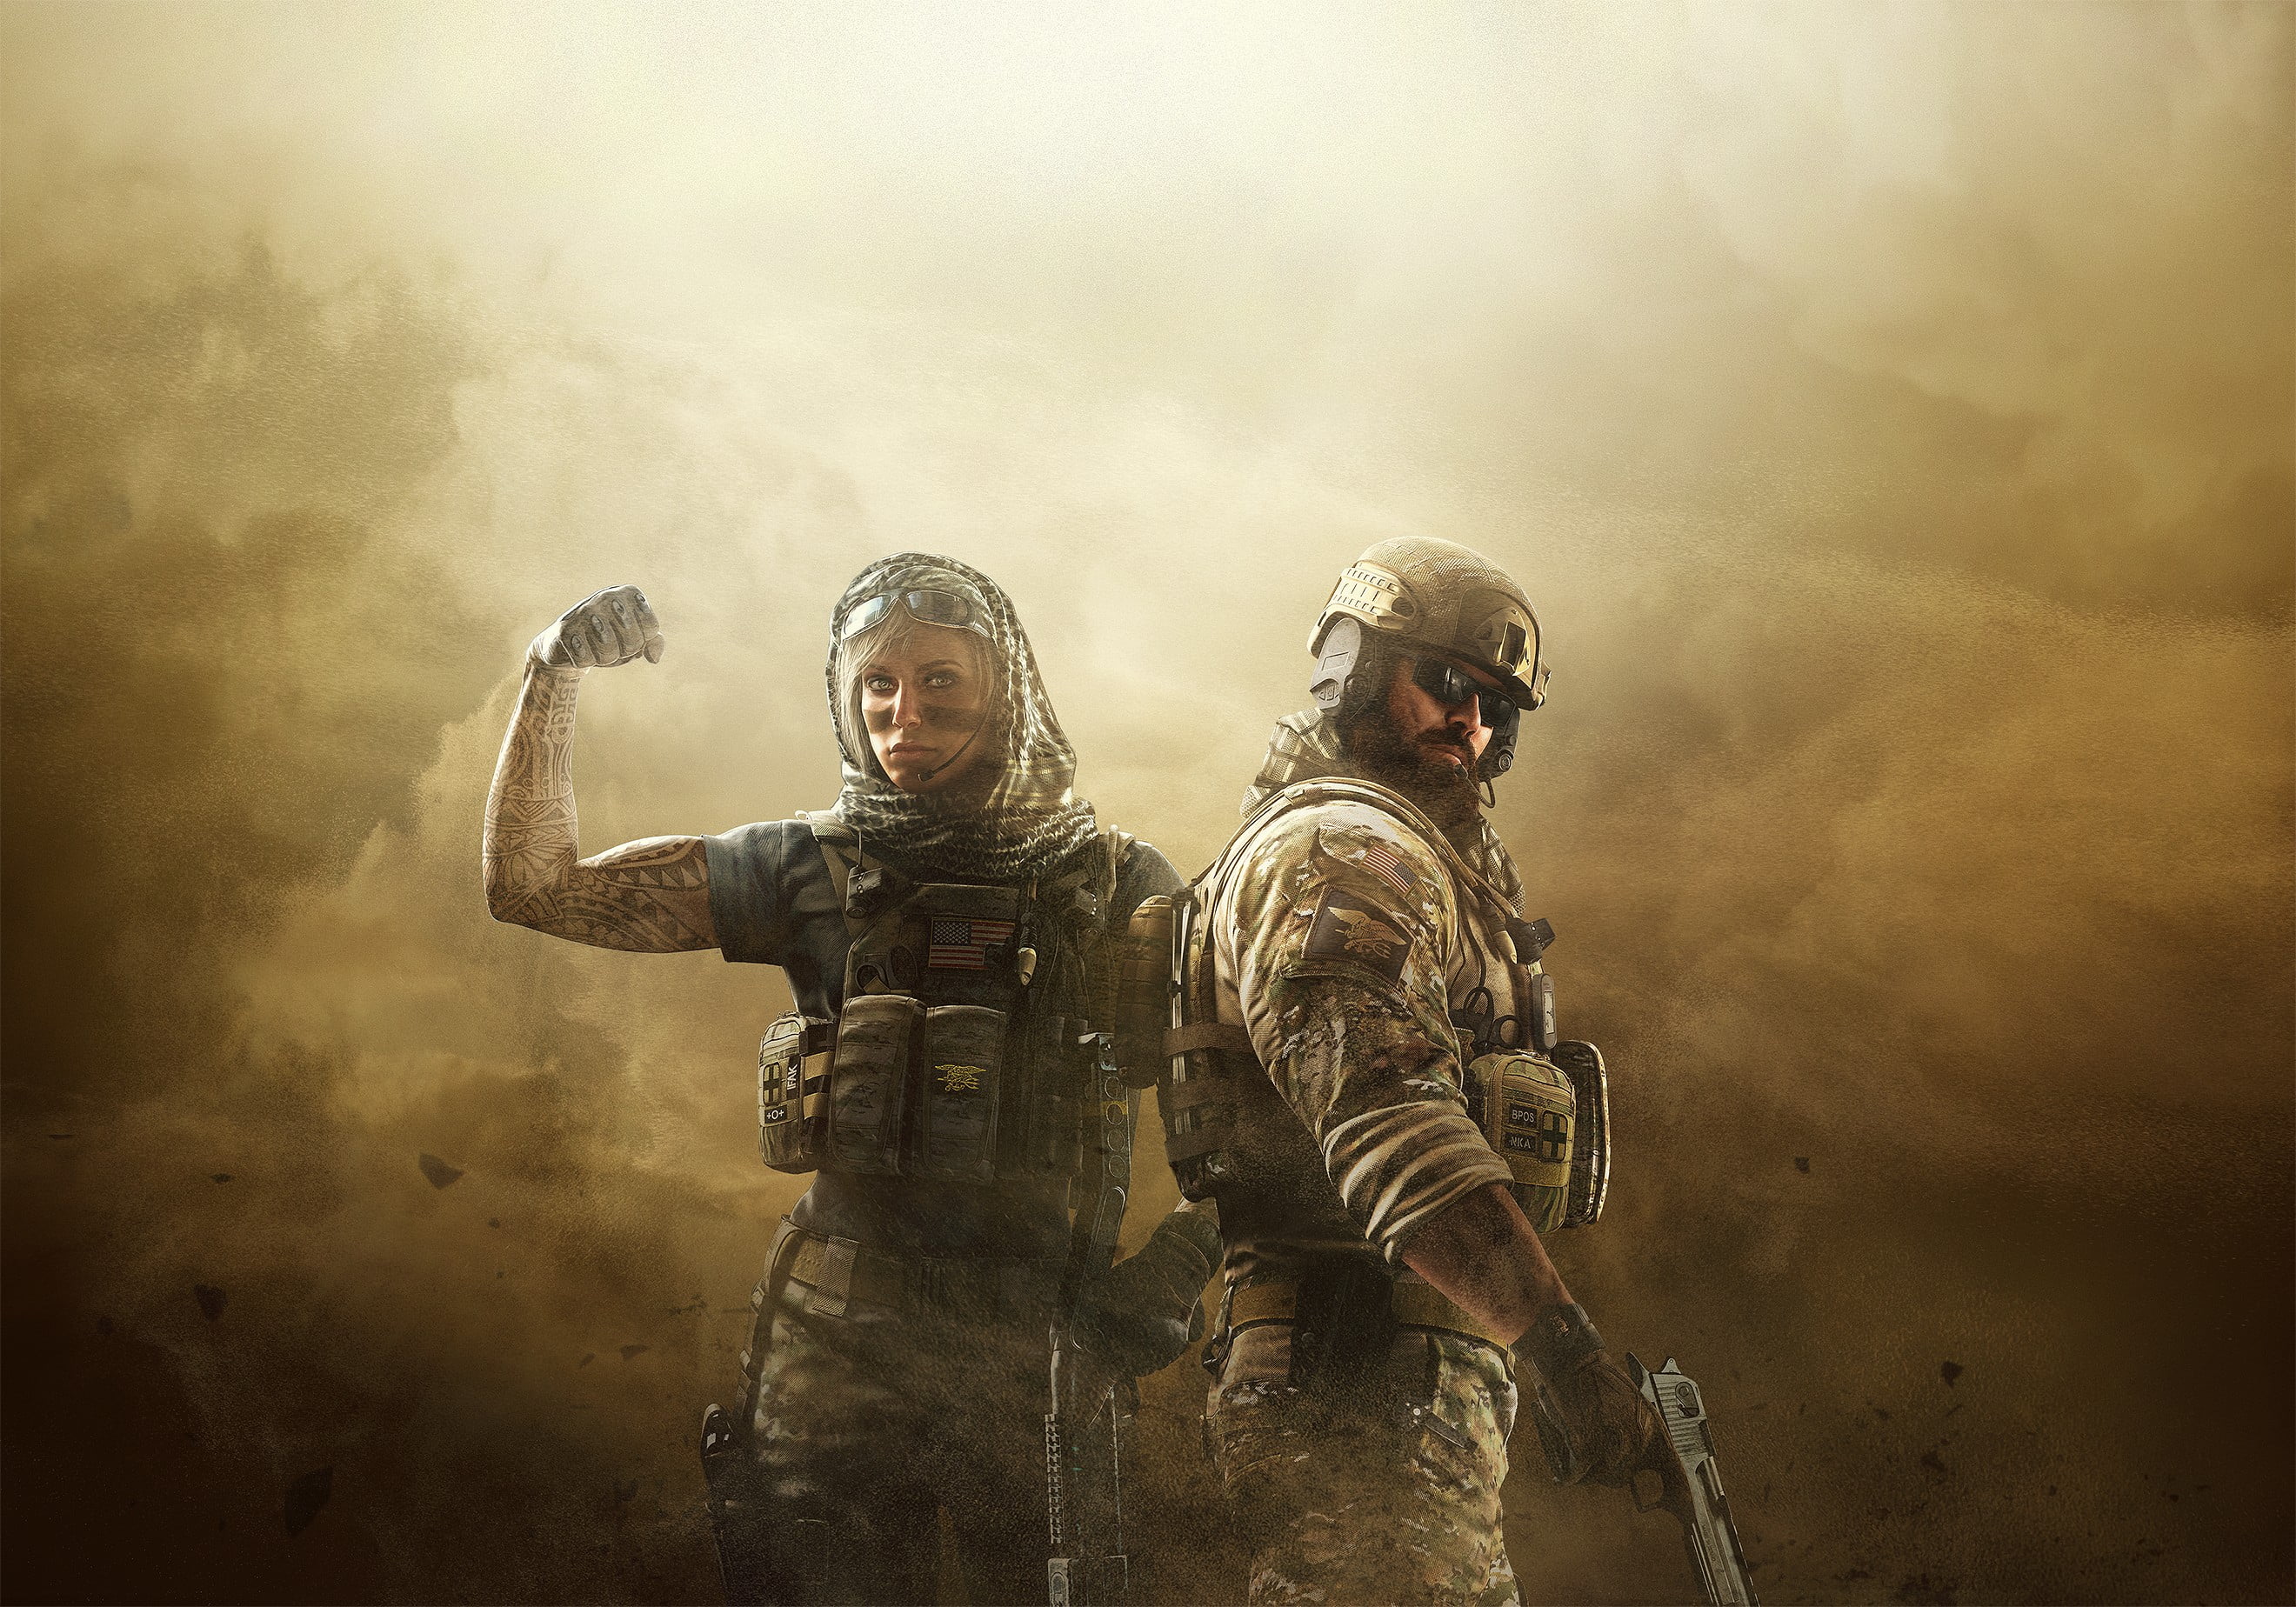 Two Soldiers Poster Rainbow Six Siege Ctu Pc Gaming Dust Line Hd Wallpaper Wallpaper Flare